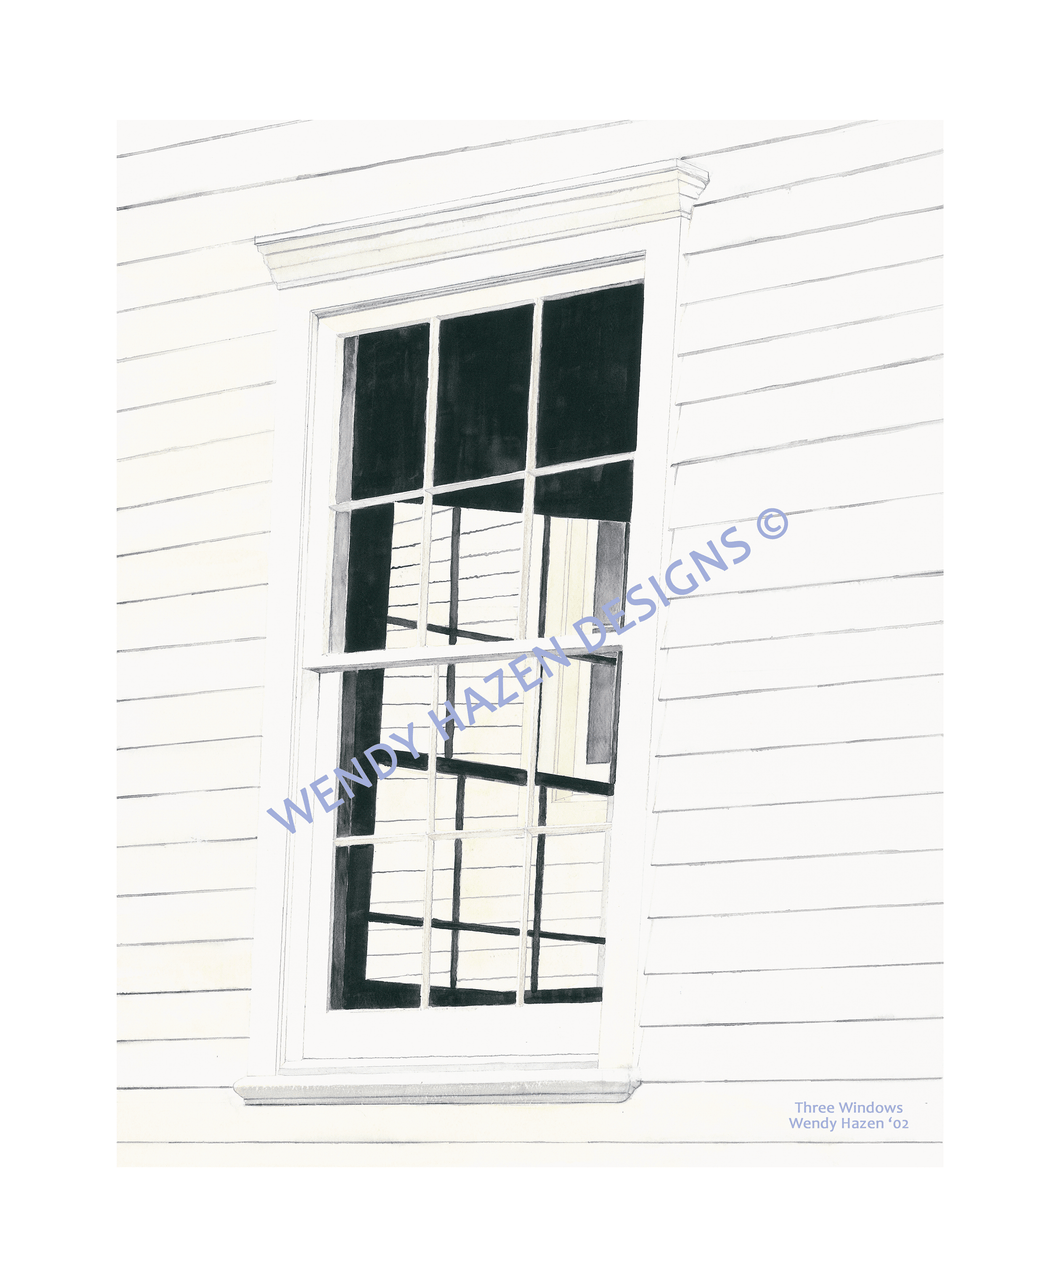 There are three windows.  A meetinghouse in Maine or Cape cod